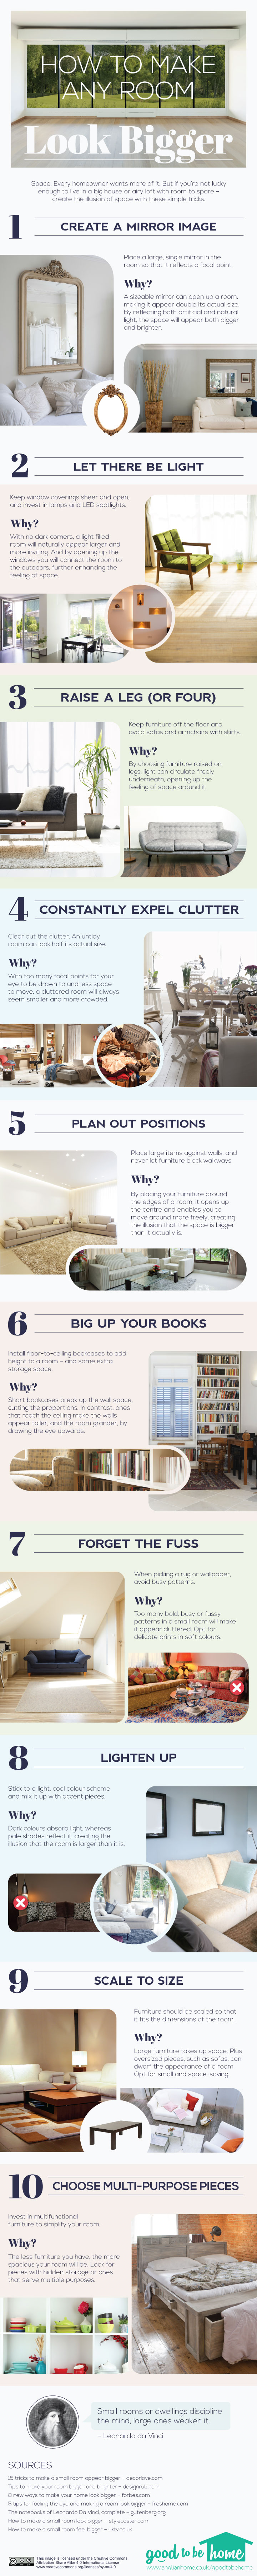 how-to-make-any-room-look-bigger